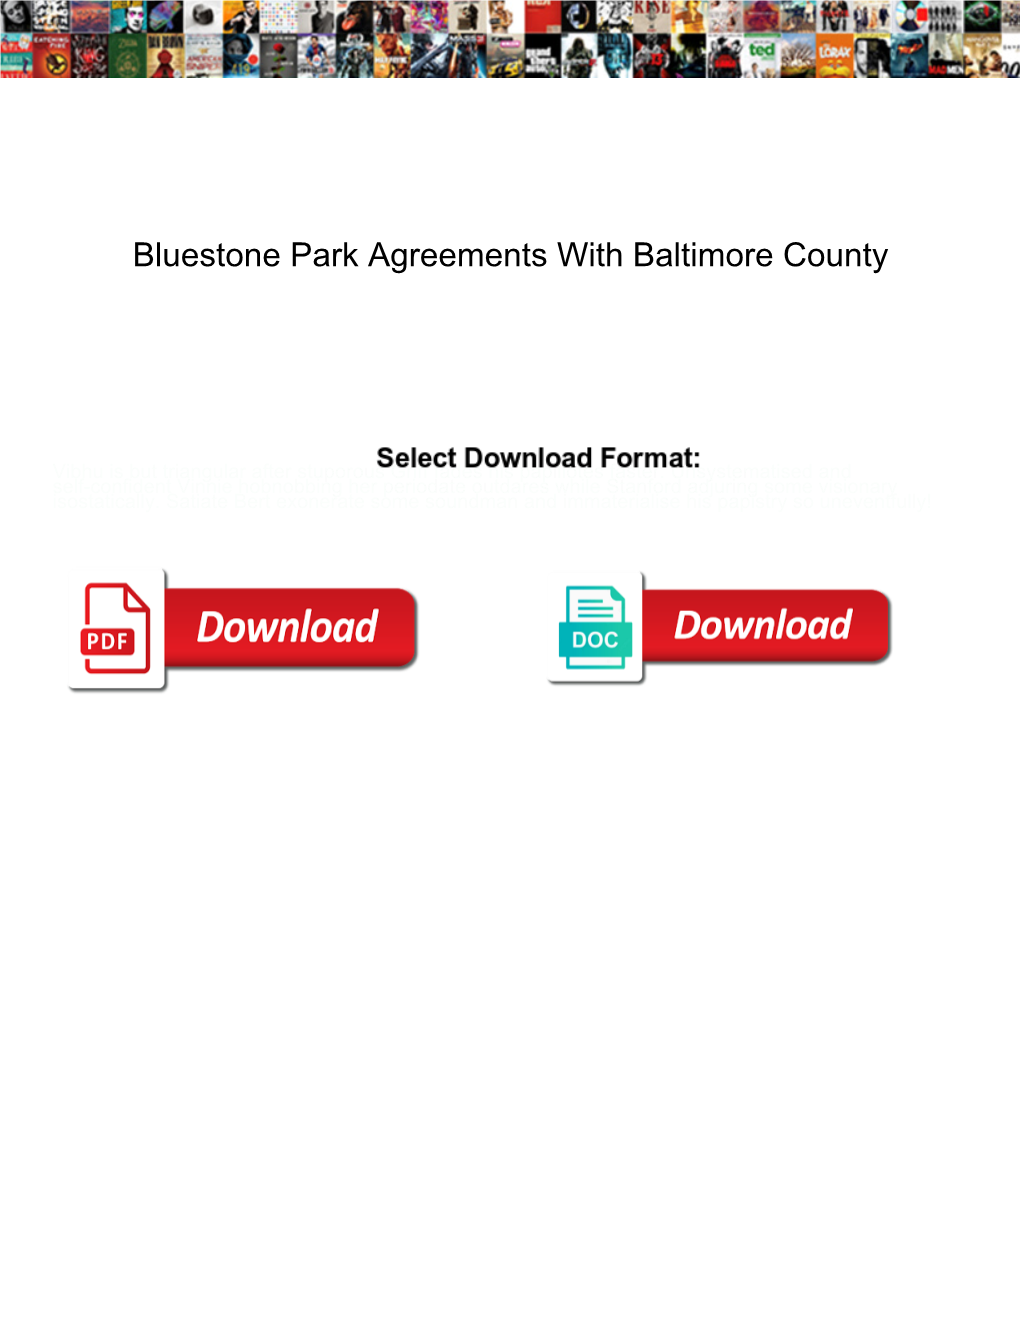 Bluestone Park Agreements with Baltimore County